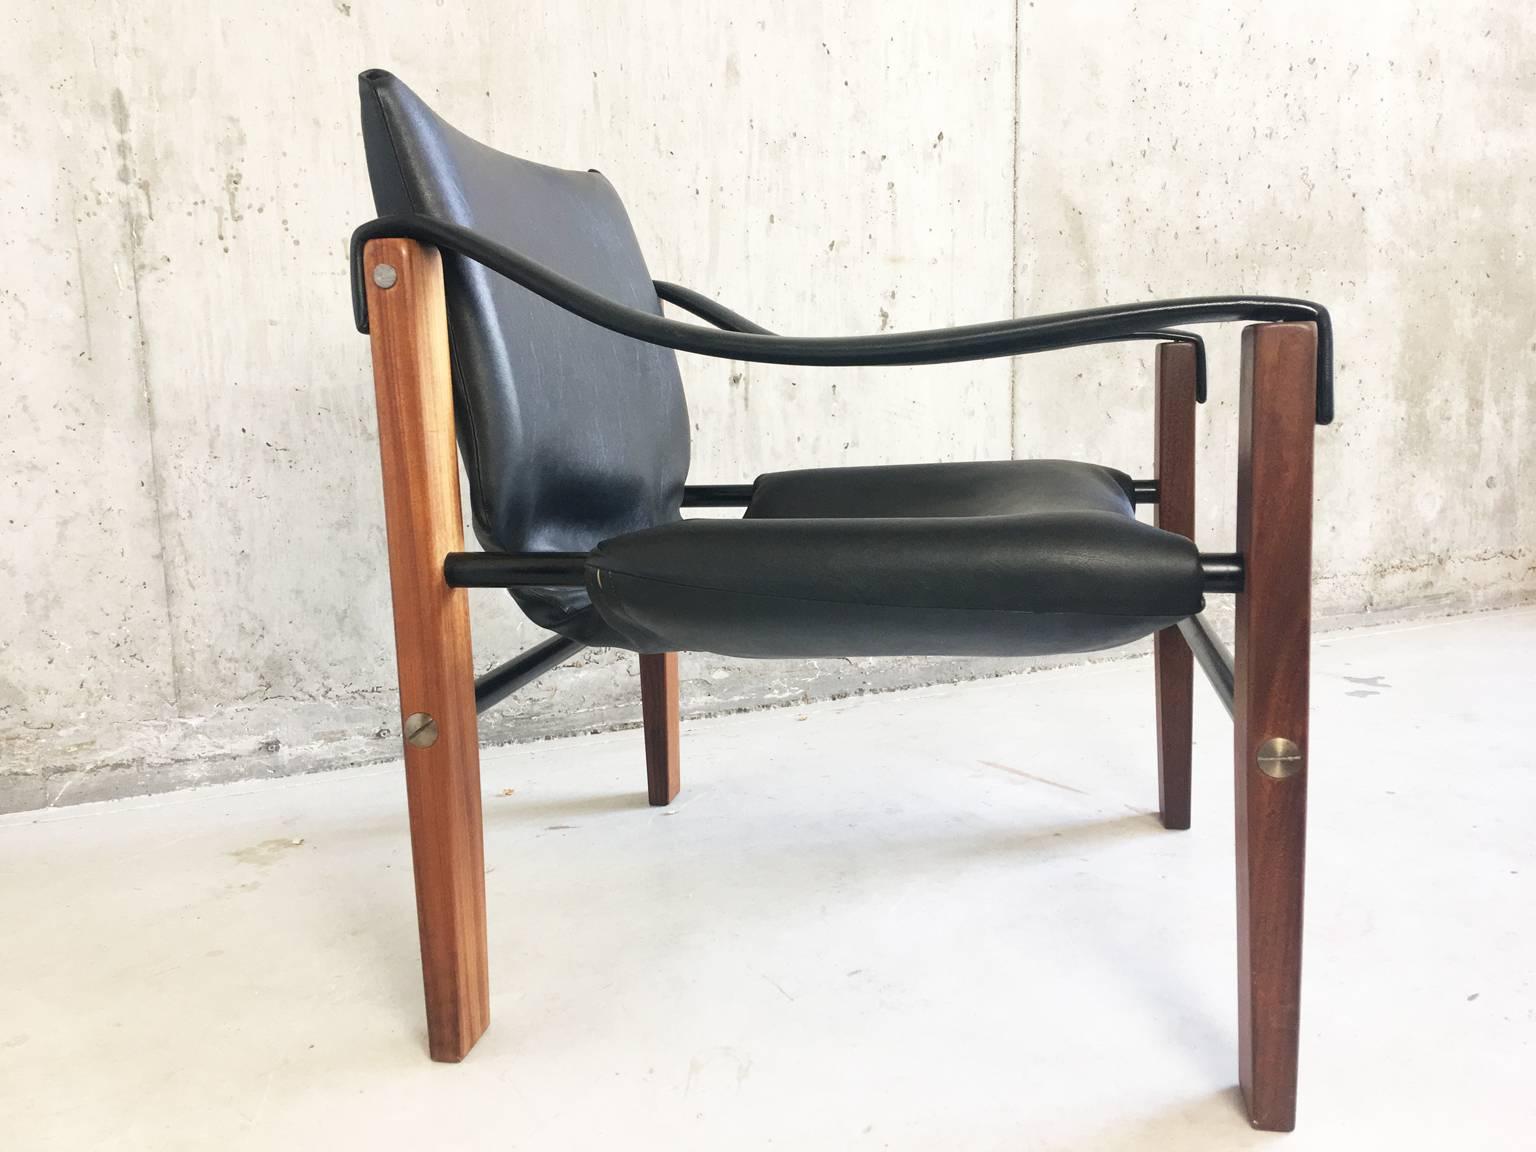 An original safari chair designed by Maurice Burke for Arkana. An elegant yet functional style, this chair is a standout piece of Mid-Century design.

Designer: Maurice Burke
Manufacturer: Arkana
Country of origin: UK
Material: Leatherette,